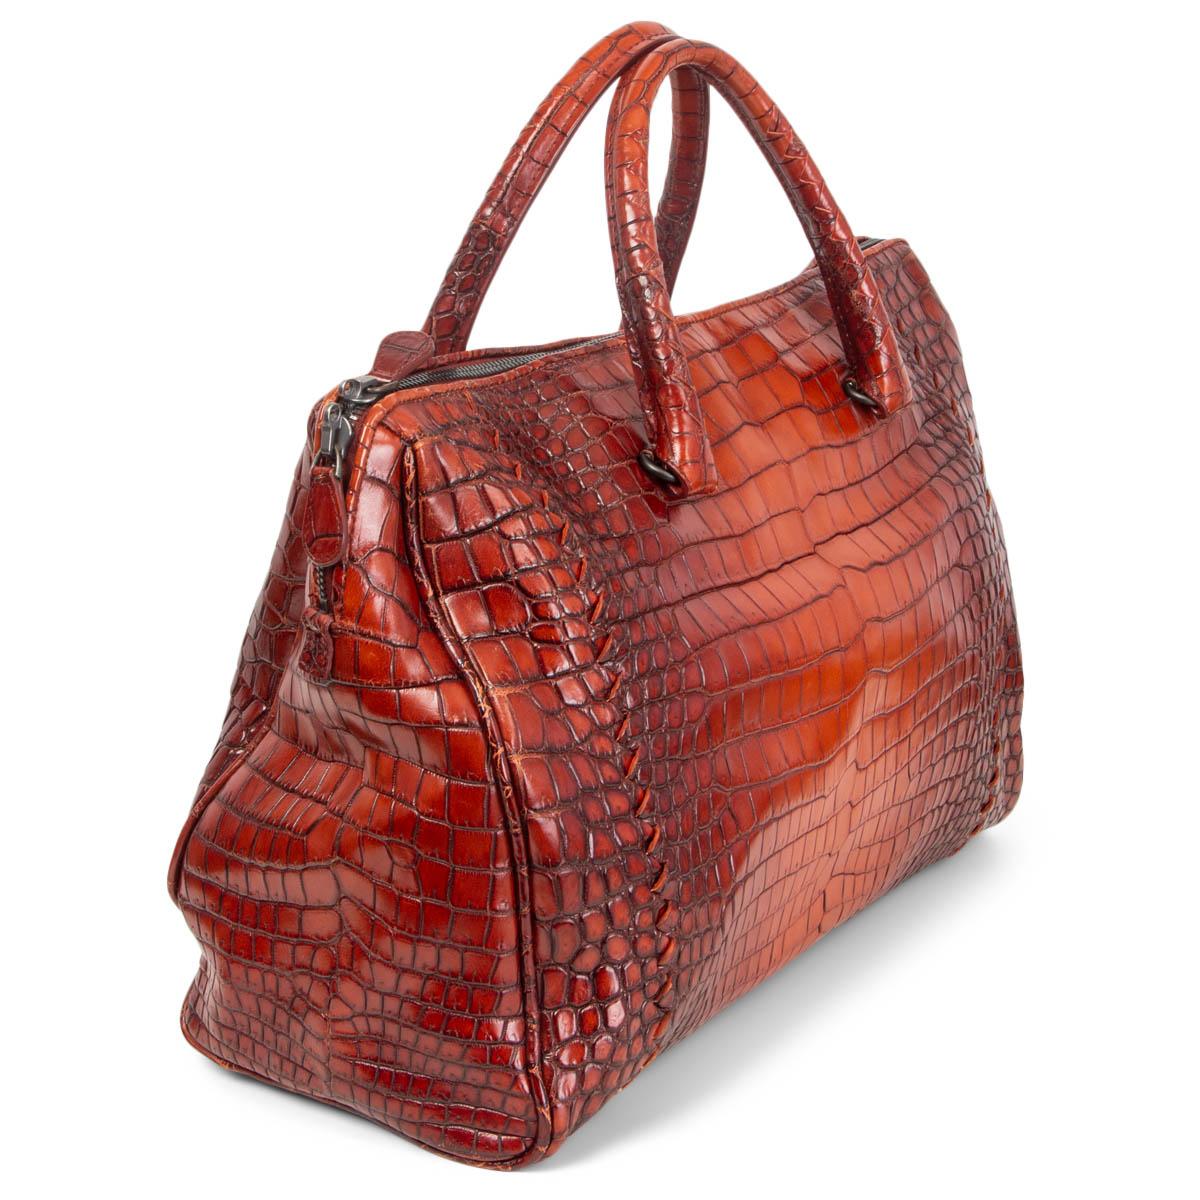 100% authentic Bottega Veneta 'Flannel' bag in ombre brick red Cocco Glace crocodile leather. Closes with a two-way zipper on top. Lined in taupe suede with a zipper pocket against the back. Has been carried with a small stain on tje lining. Overall